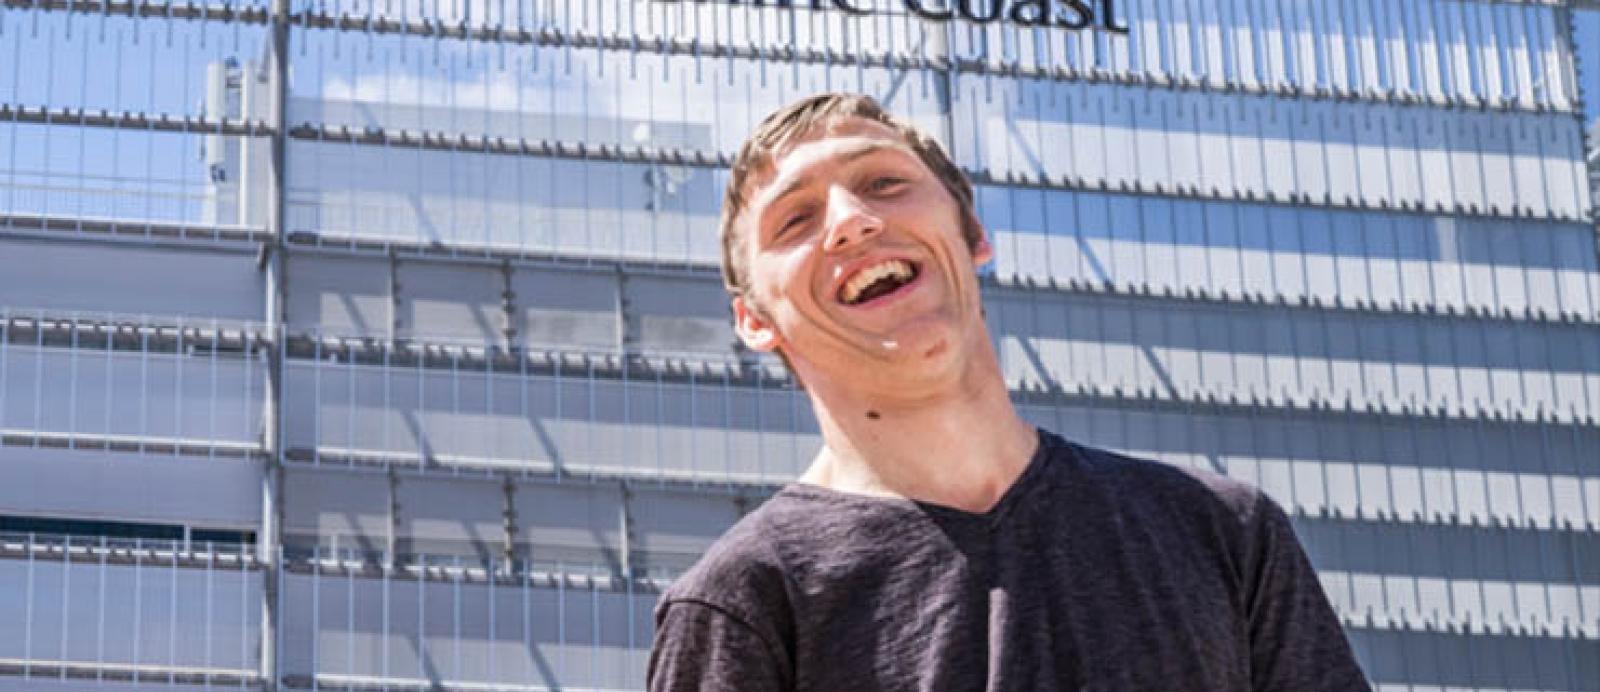 Young man with a disability smiles while being outside 